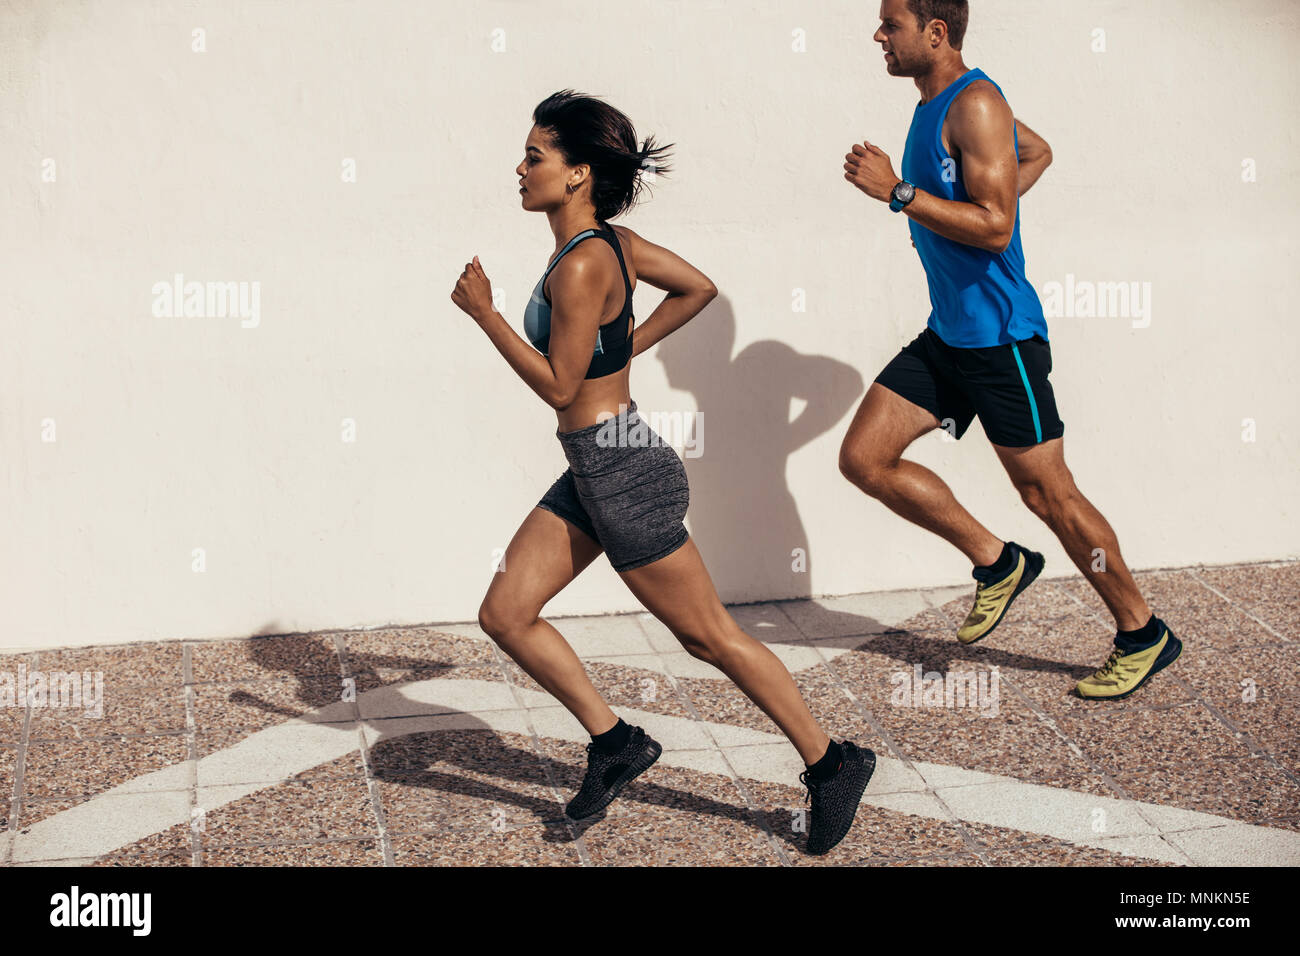 Two runners running outdoors in morning. Man and woman jogging together. Stock Photo